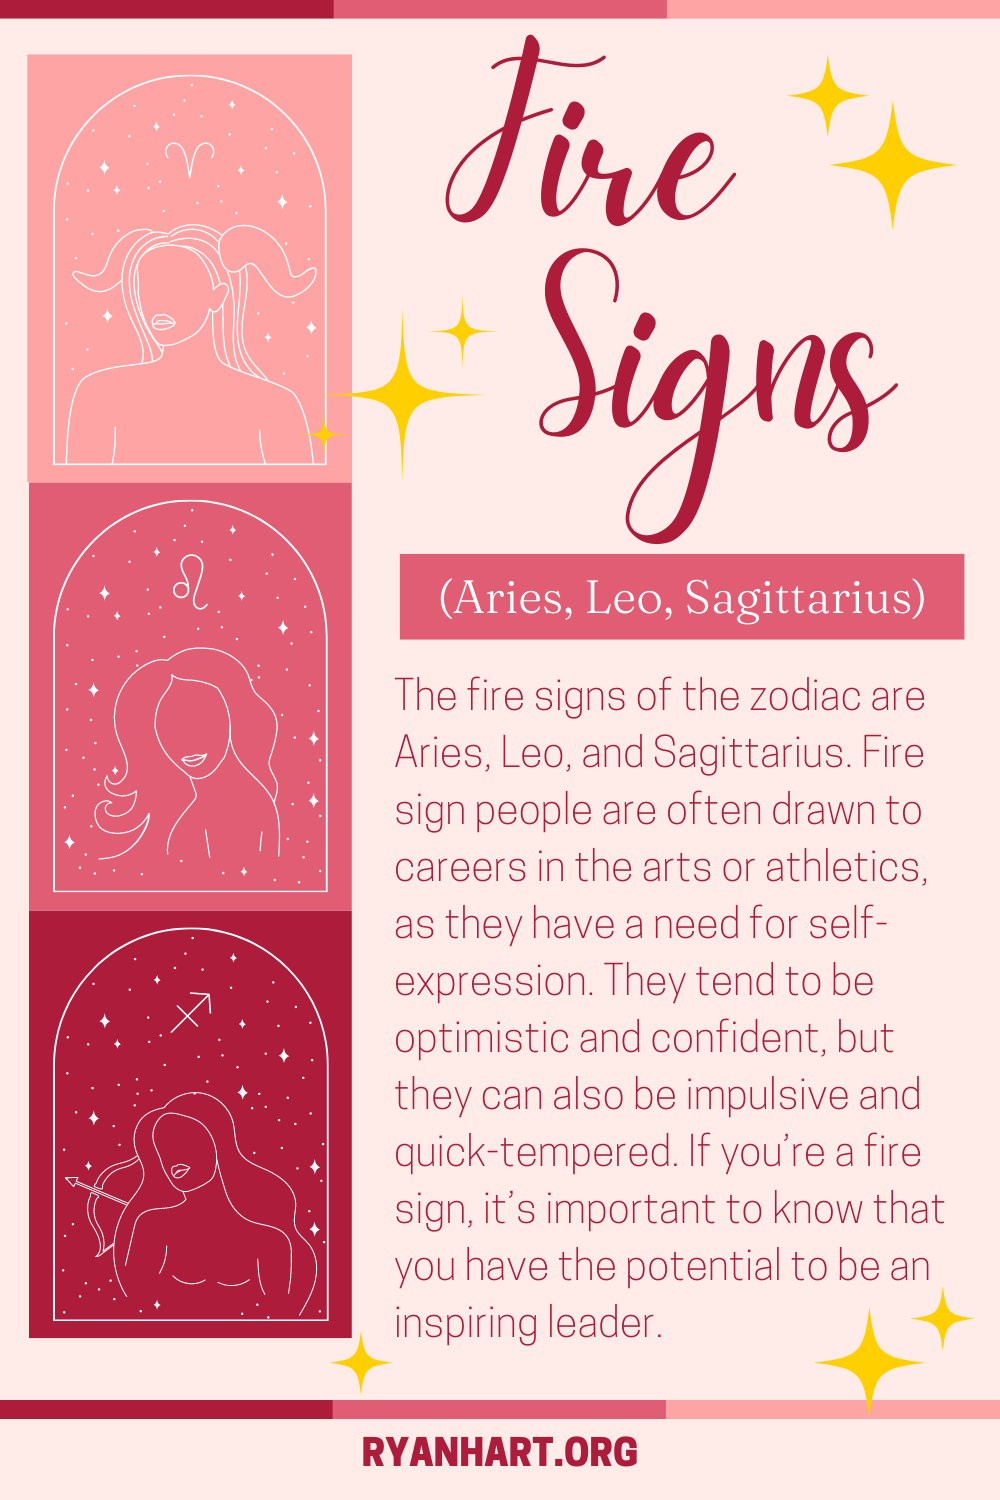 Fire Signs (Aries, Leo, and Sagittarius)